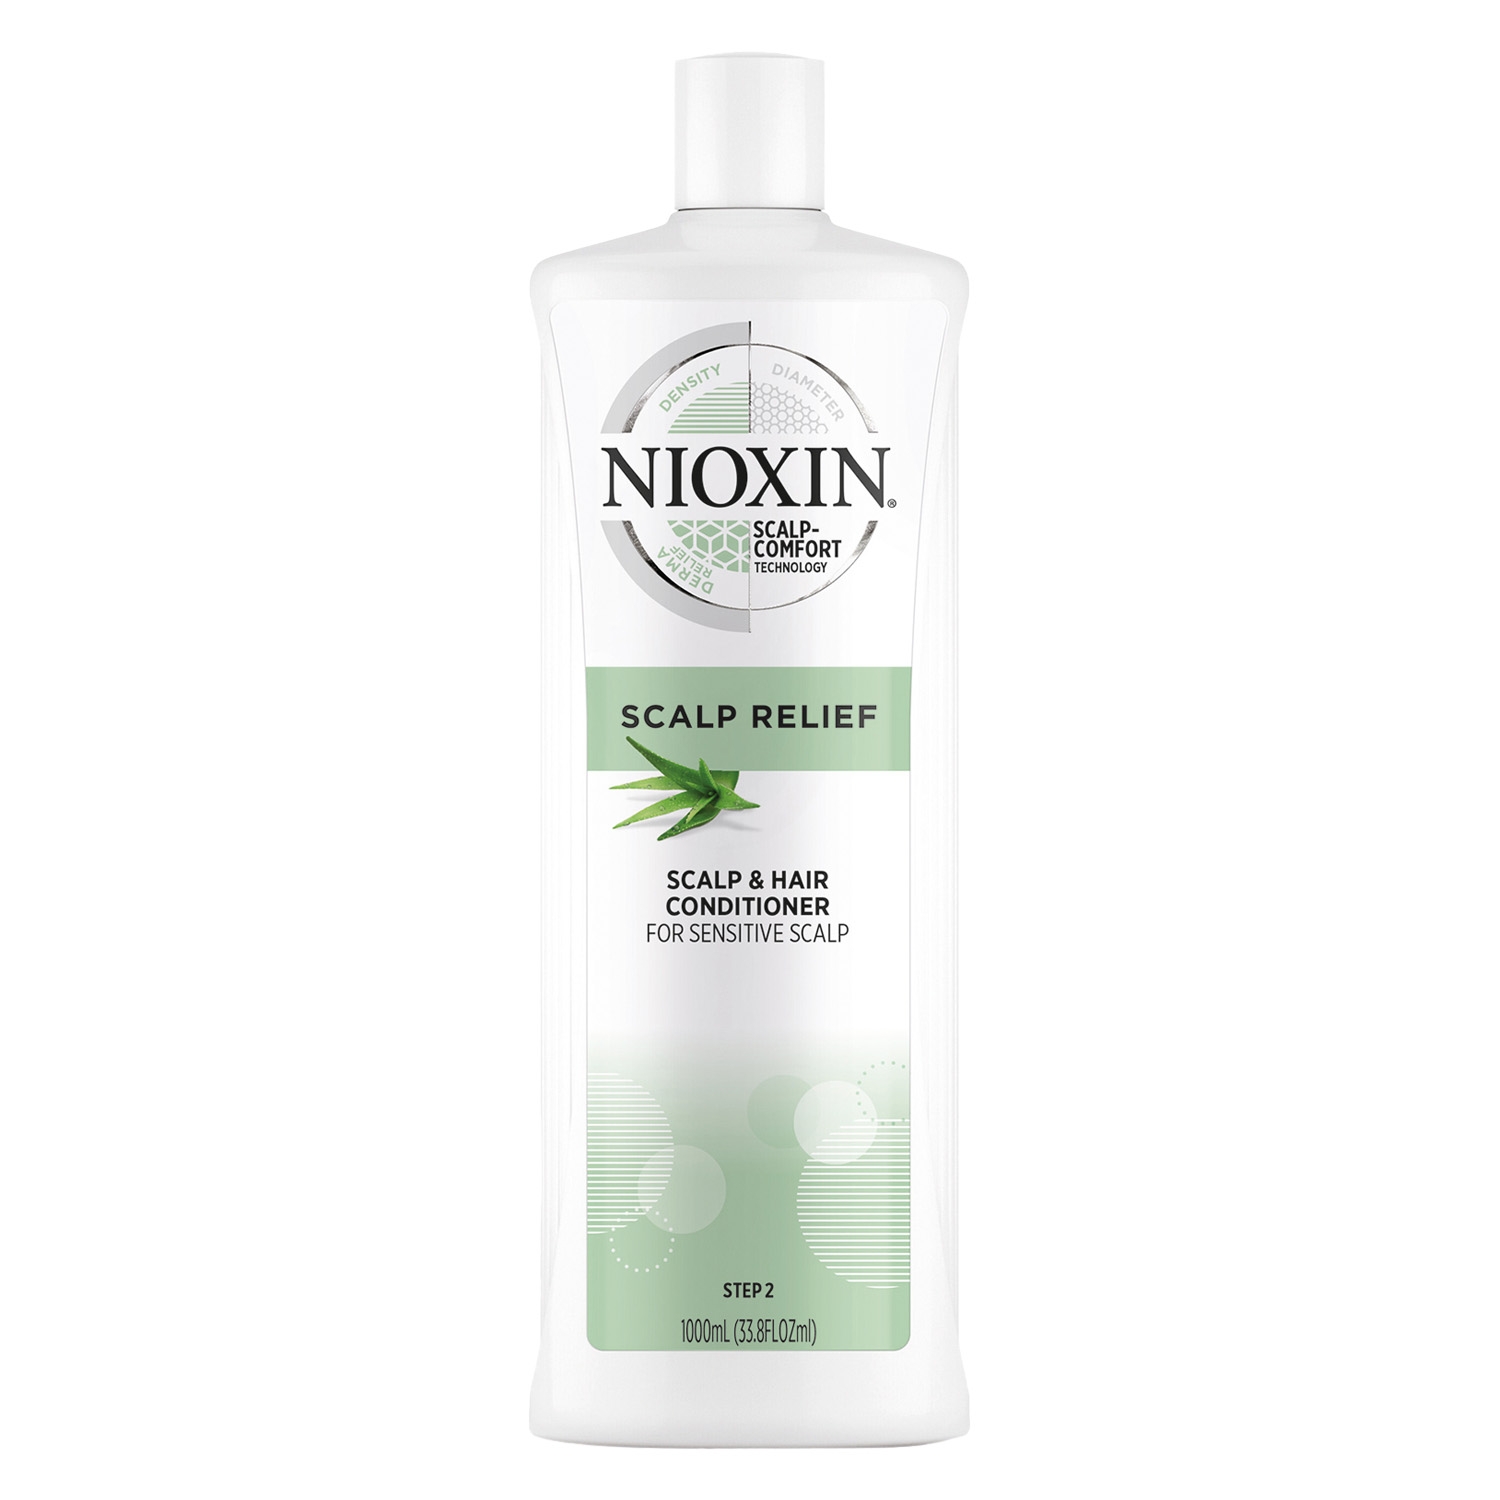 Product image from Nioxin - Scalp Relief Conditioner